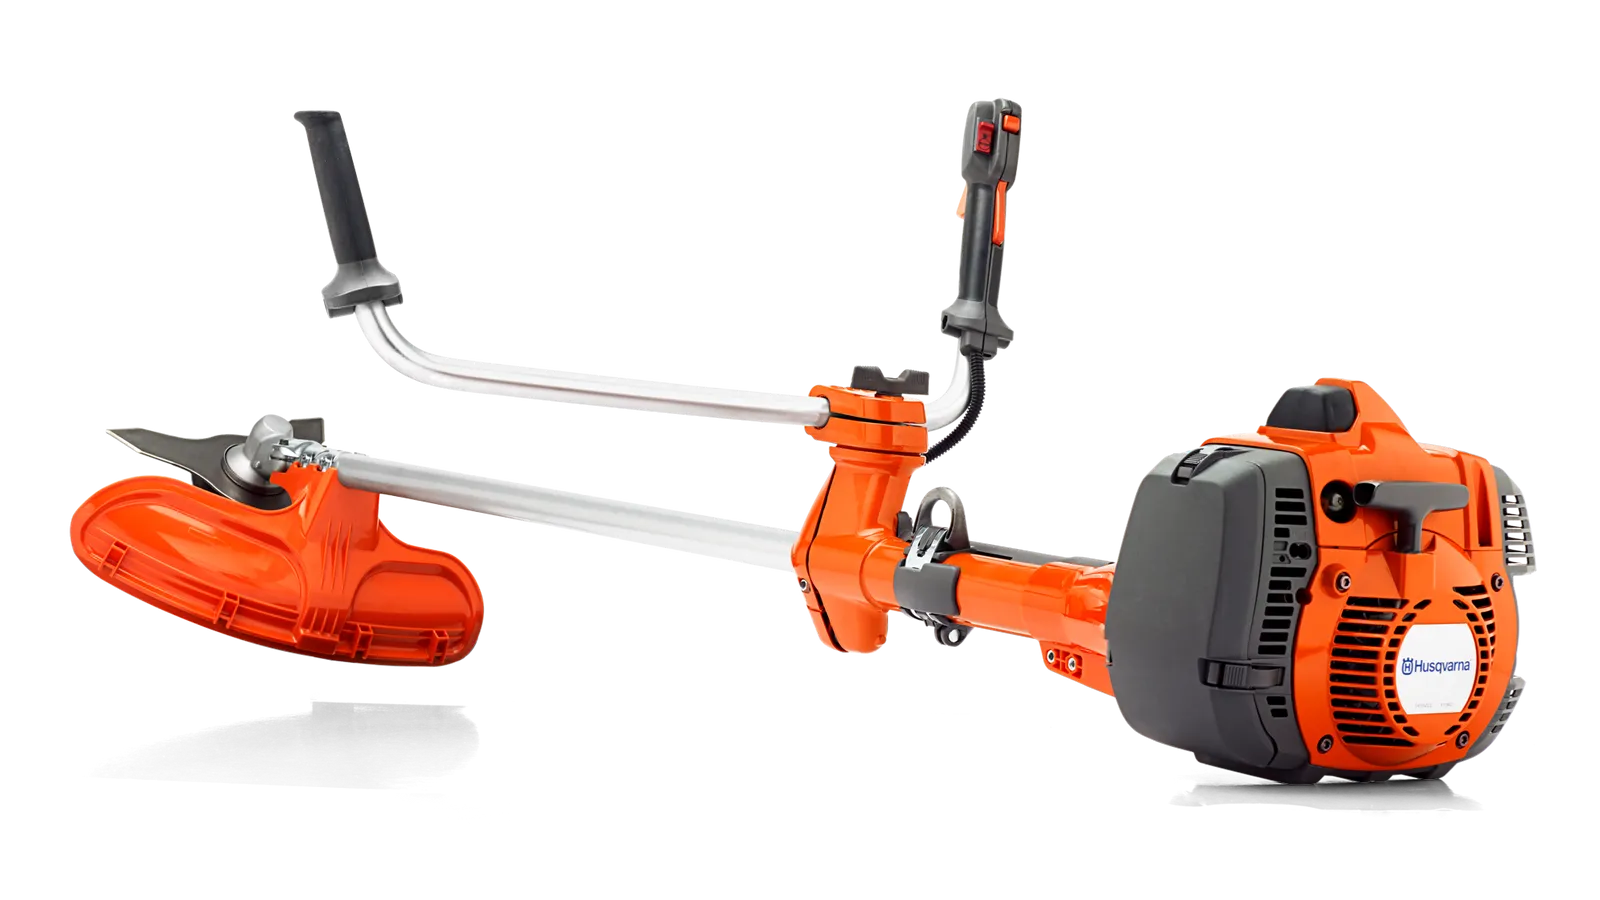 545FR Forestry Clearing Saw | Husqvarna US